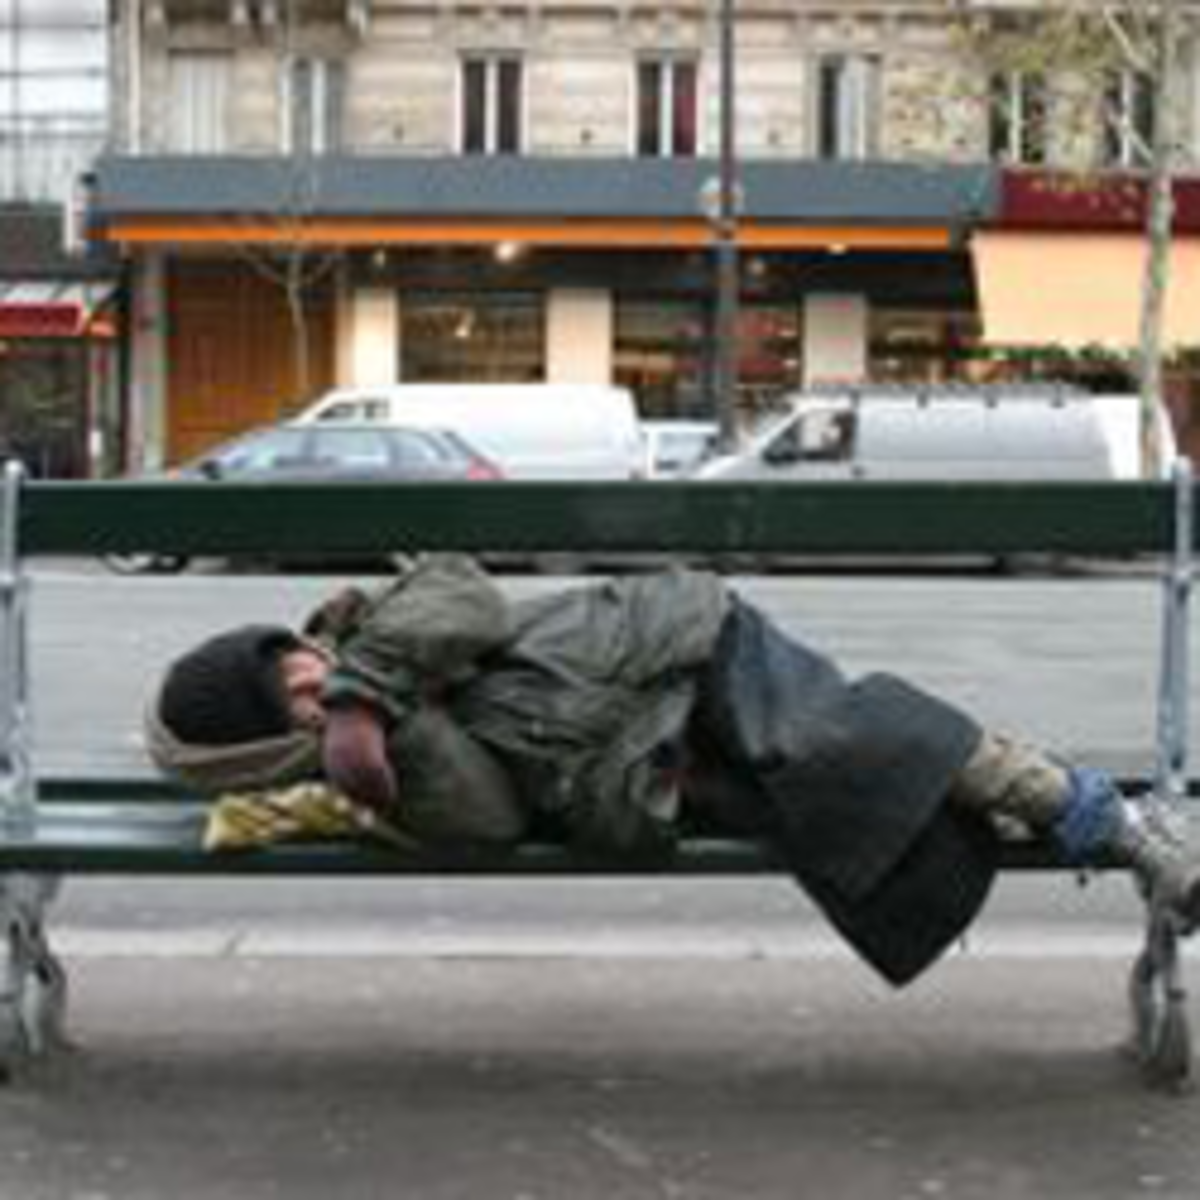 Safer Outdoor Sleeping While Homeless